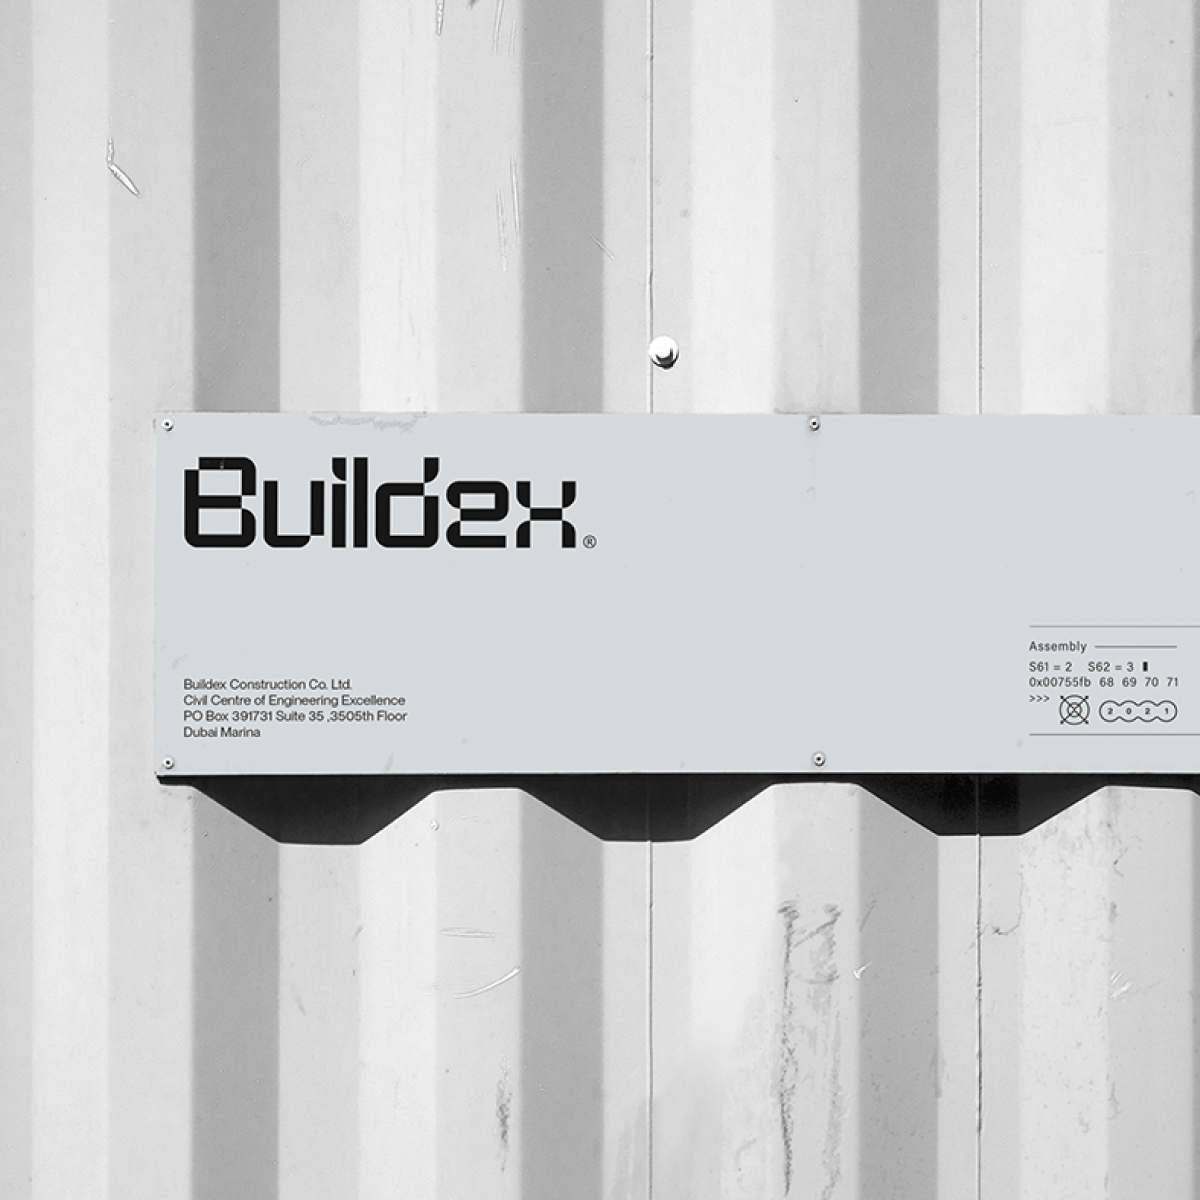 Cover Image for Buildex, a large construction company.